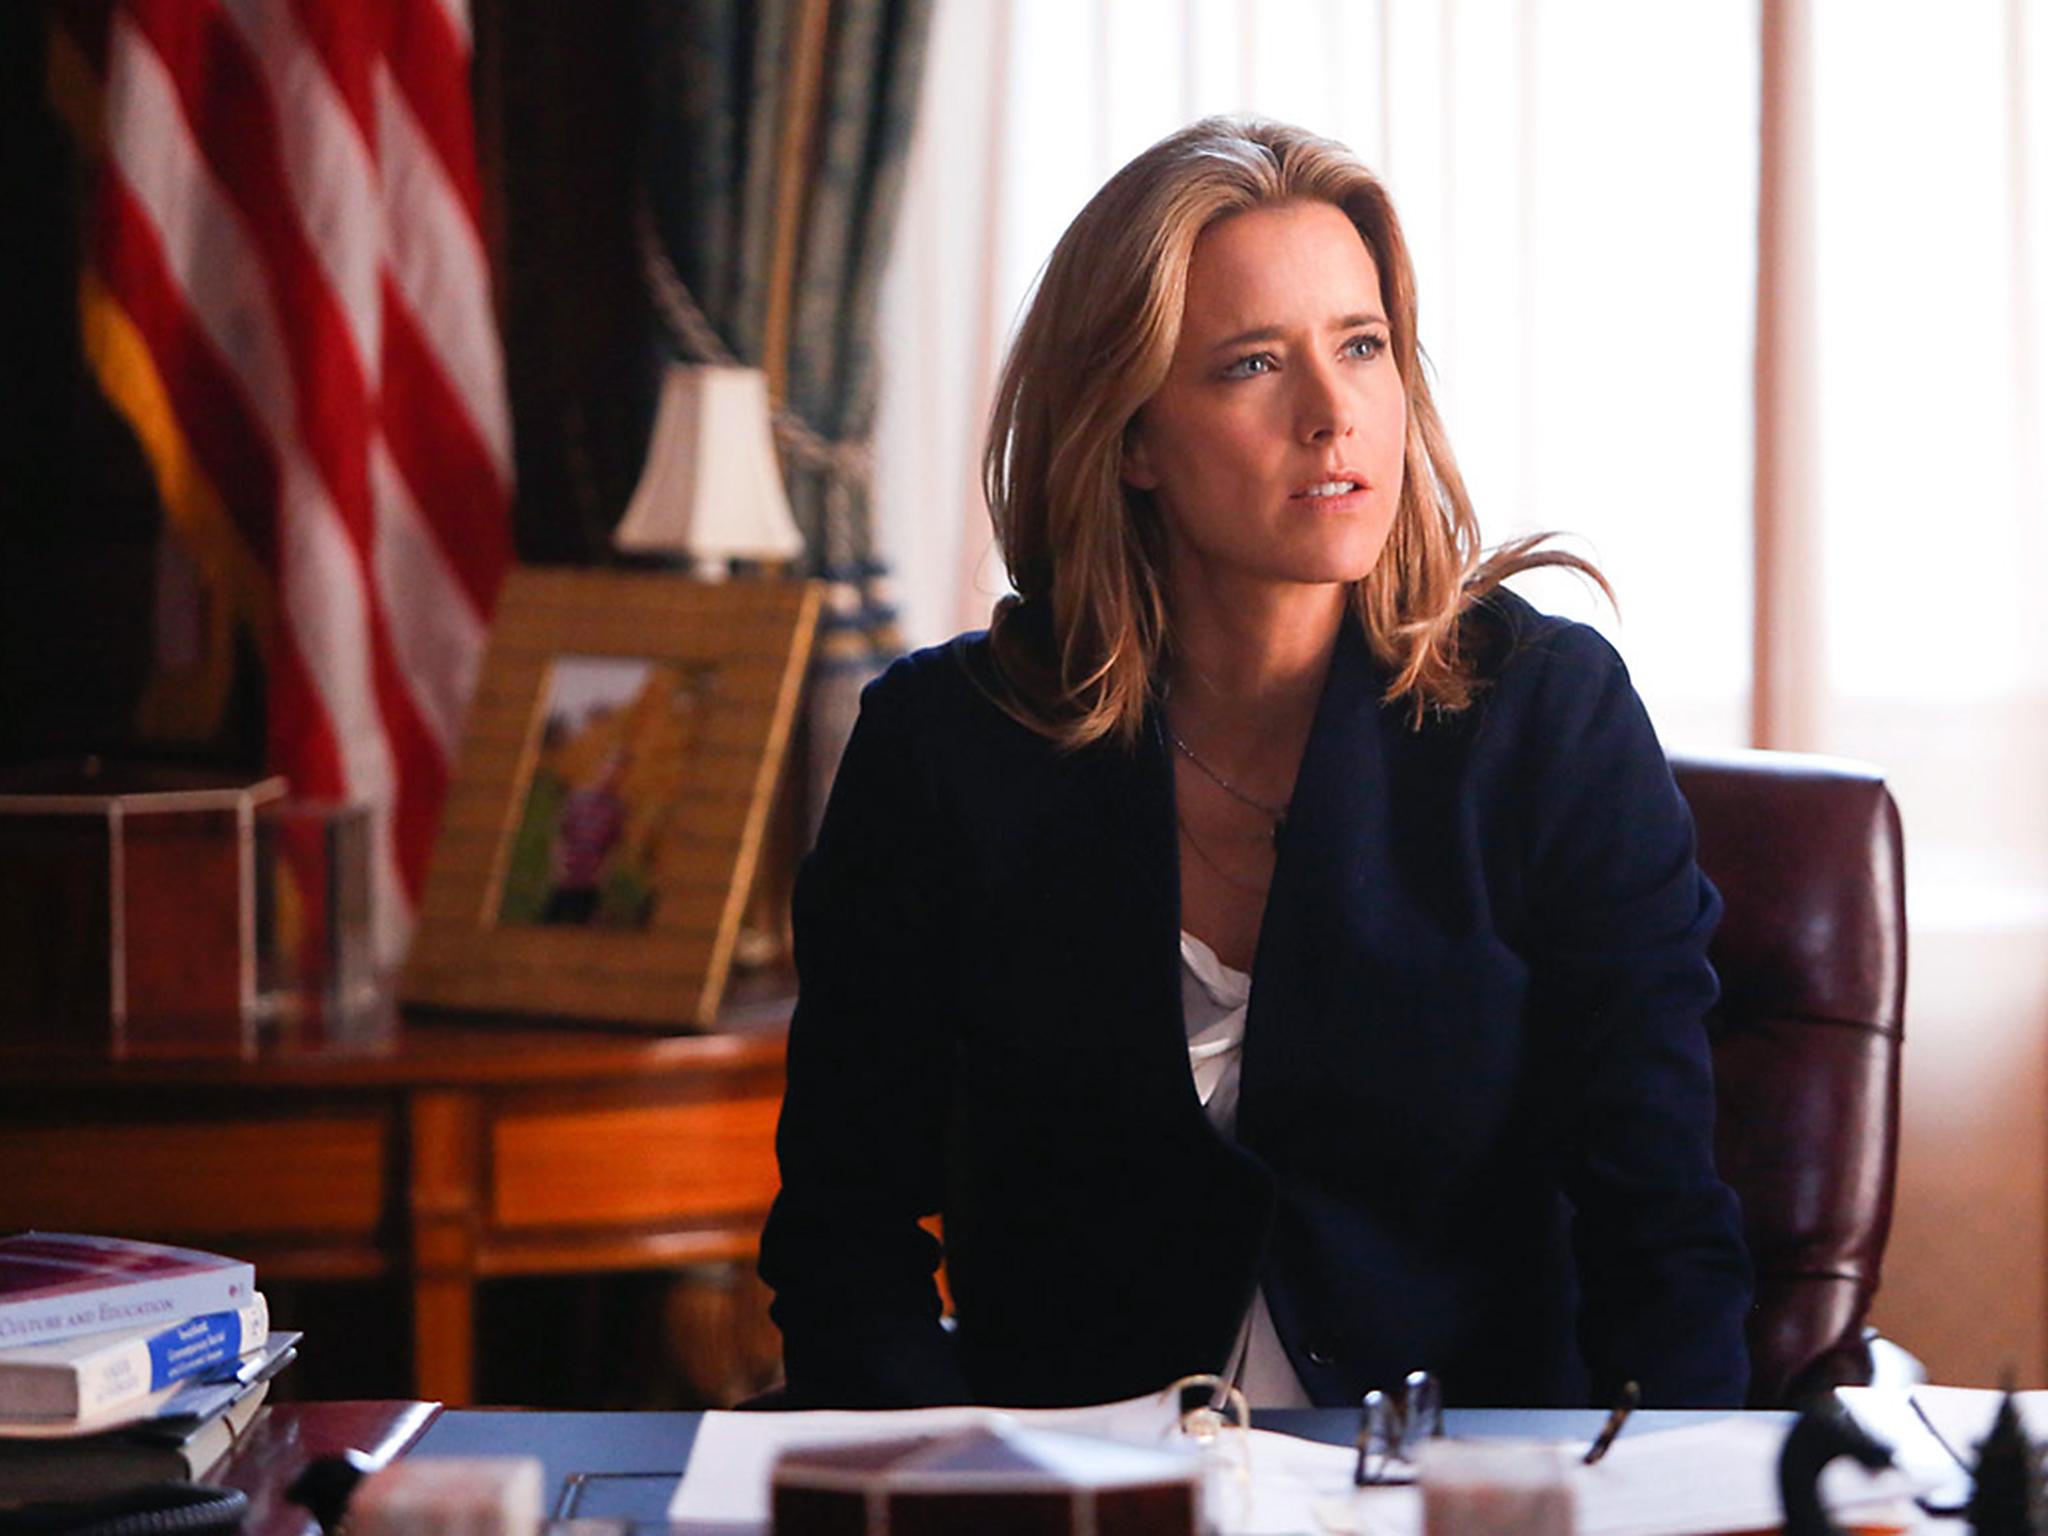 Actress Tea Leoni stars as US Secretary of State Elizabeth McCord in the offending series